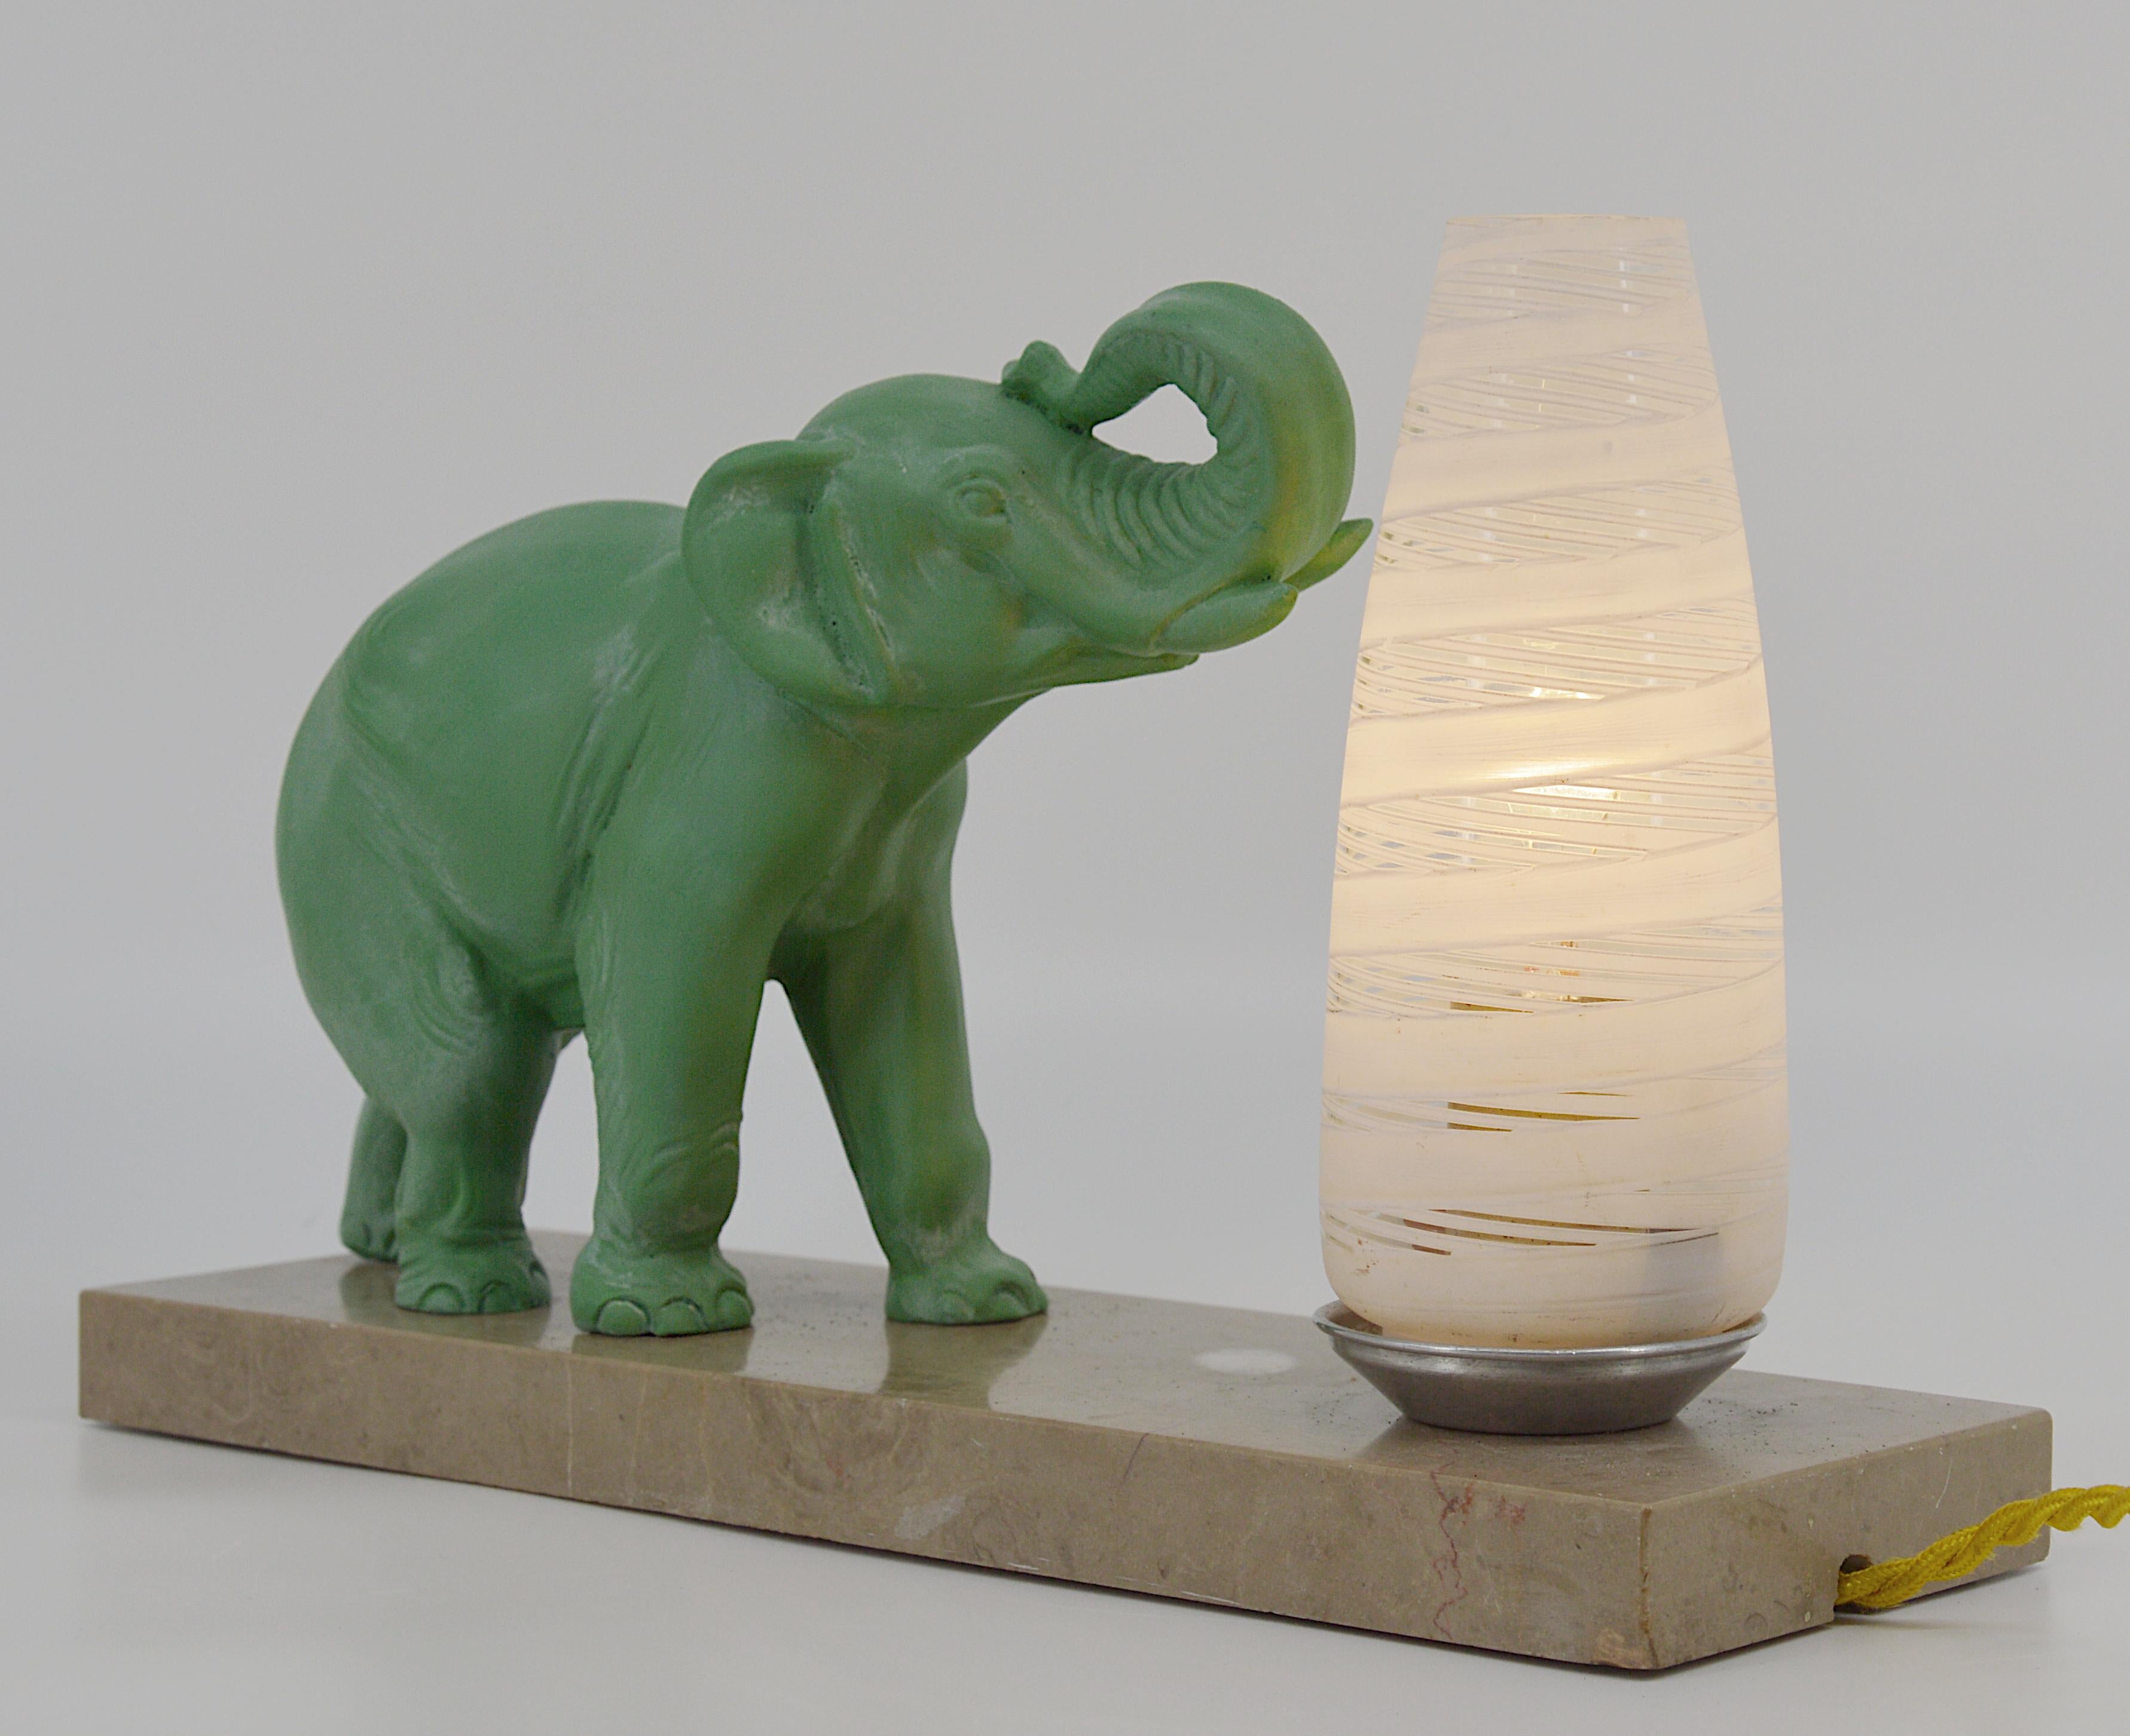 French Art Deco table lamp / night-light, France, 1930s. Green patinated spelter elephant on its marble base. Enameled glass shade. Measures: Width: 11.8